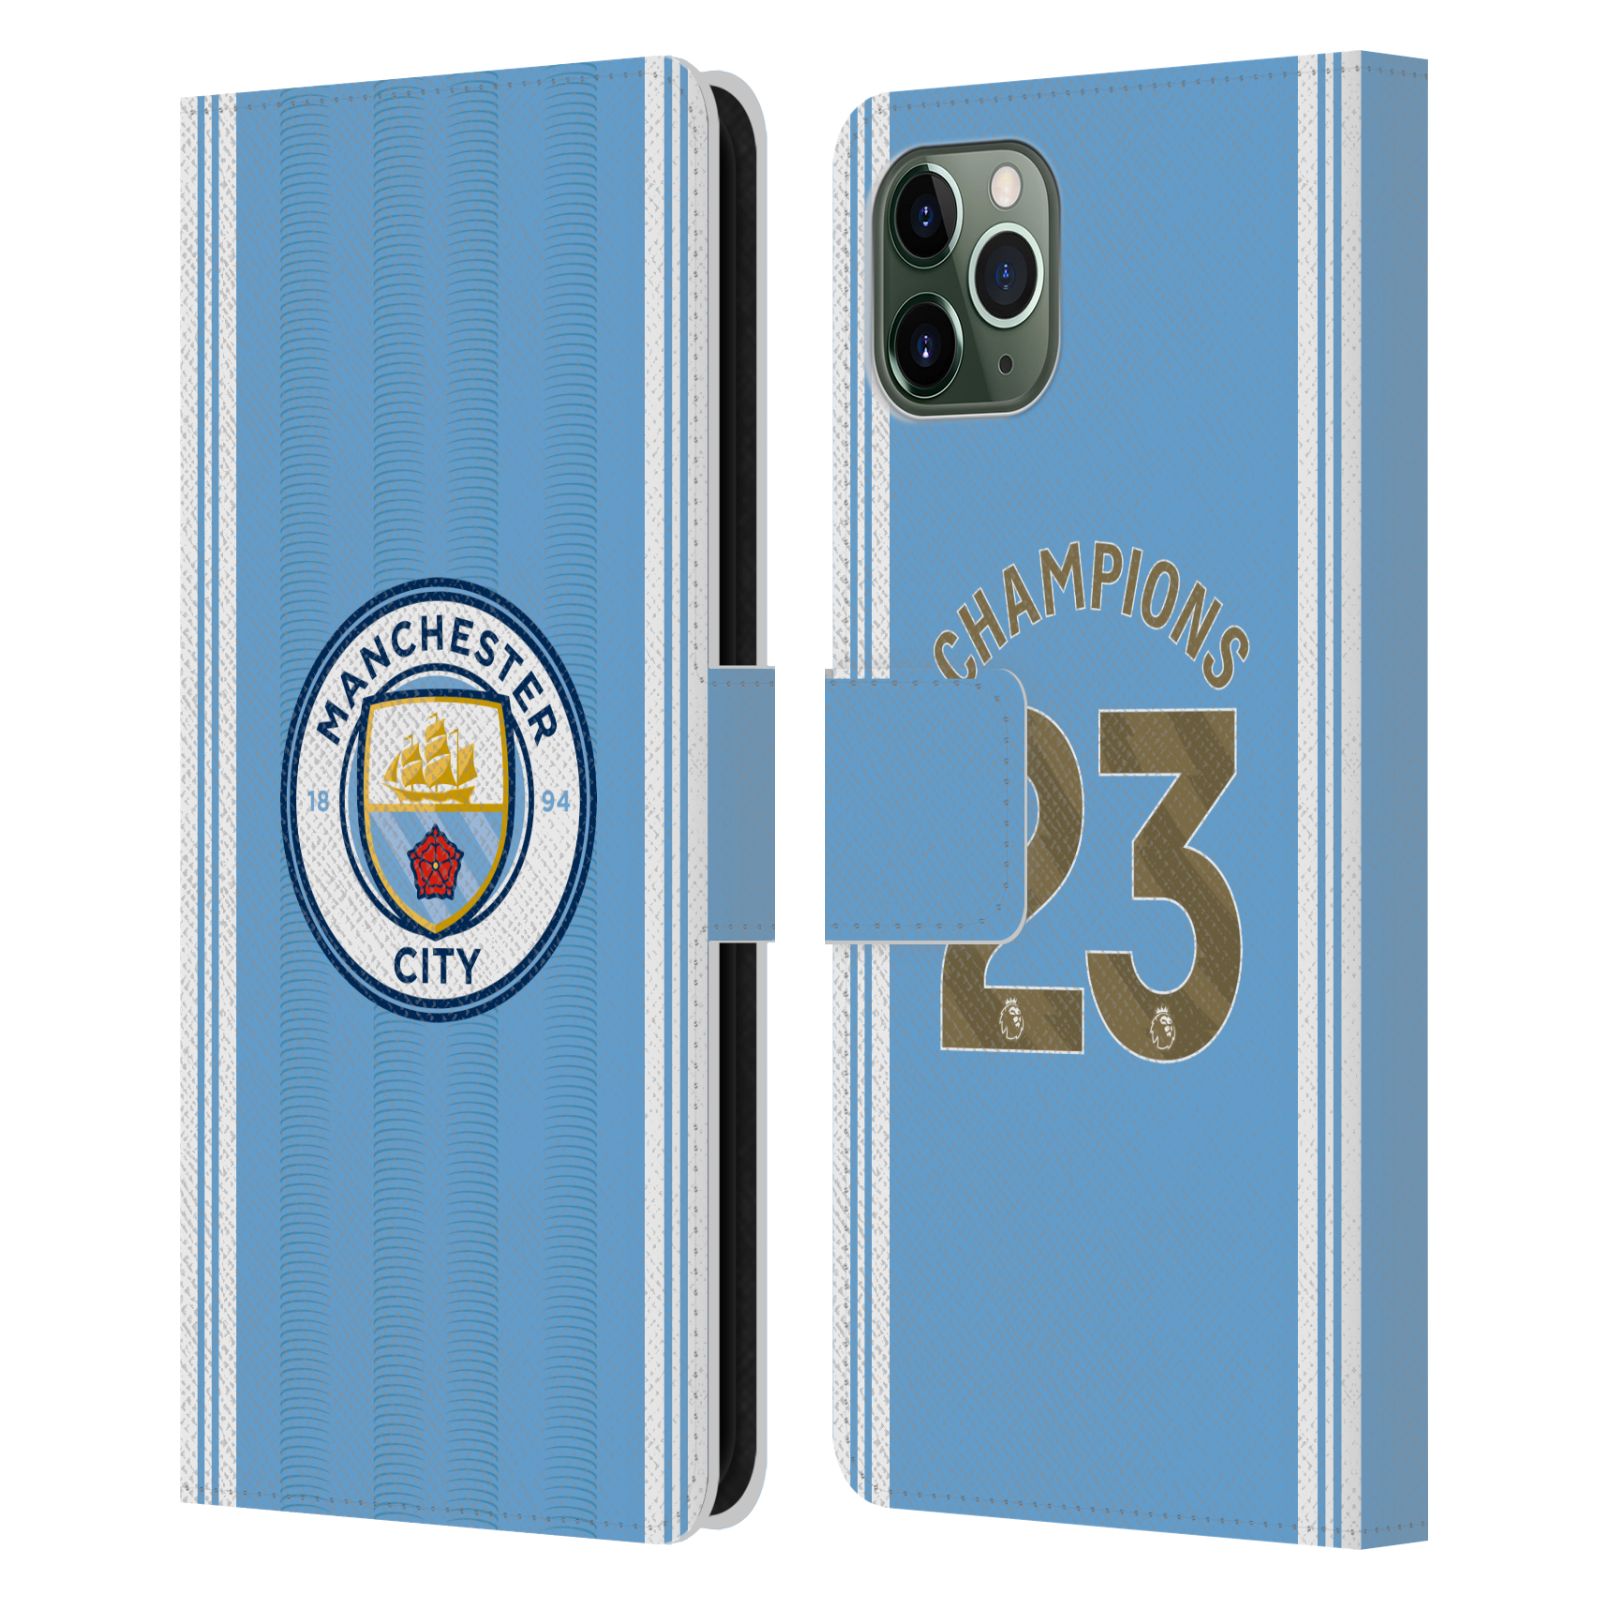 Pouzdro na mobil Apple Iphone 11 Pro Max - HEAD CASE - Manchester City - Champions dres 2